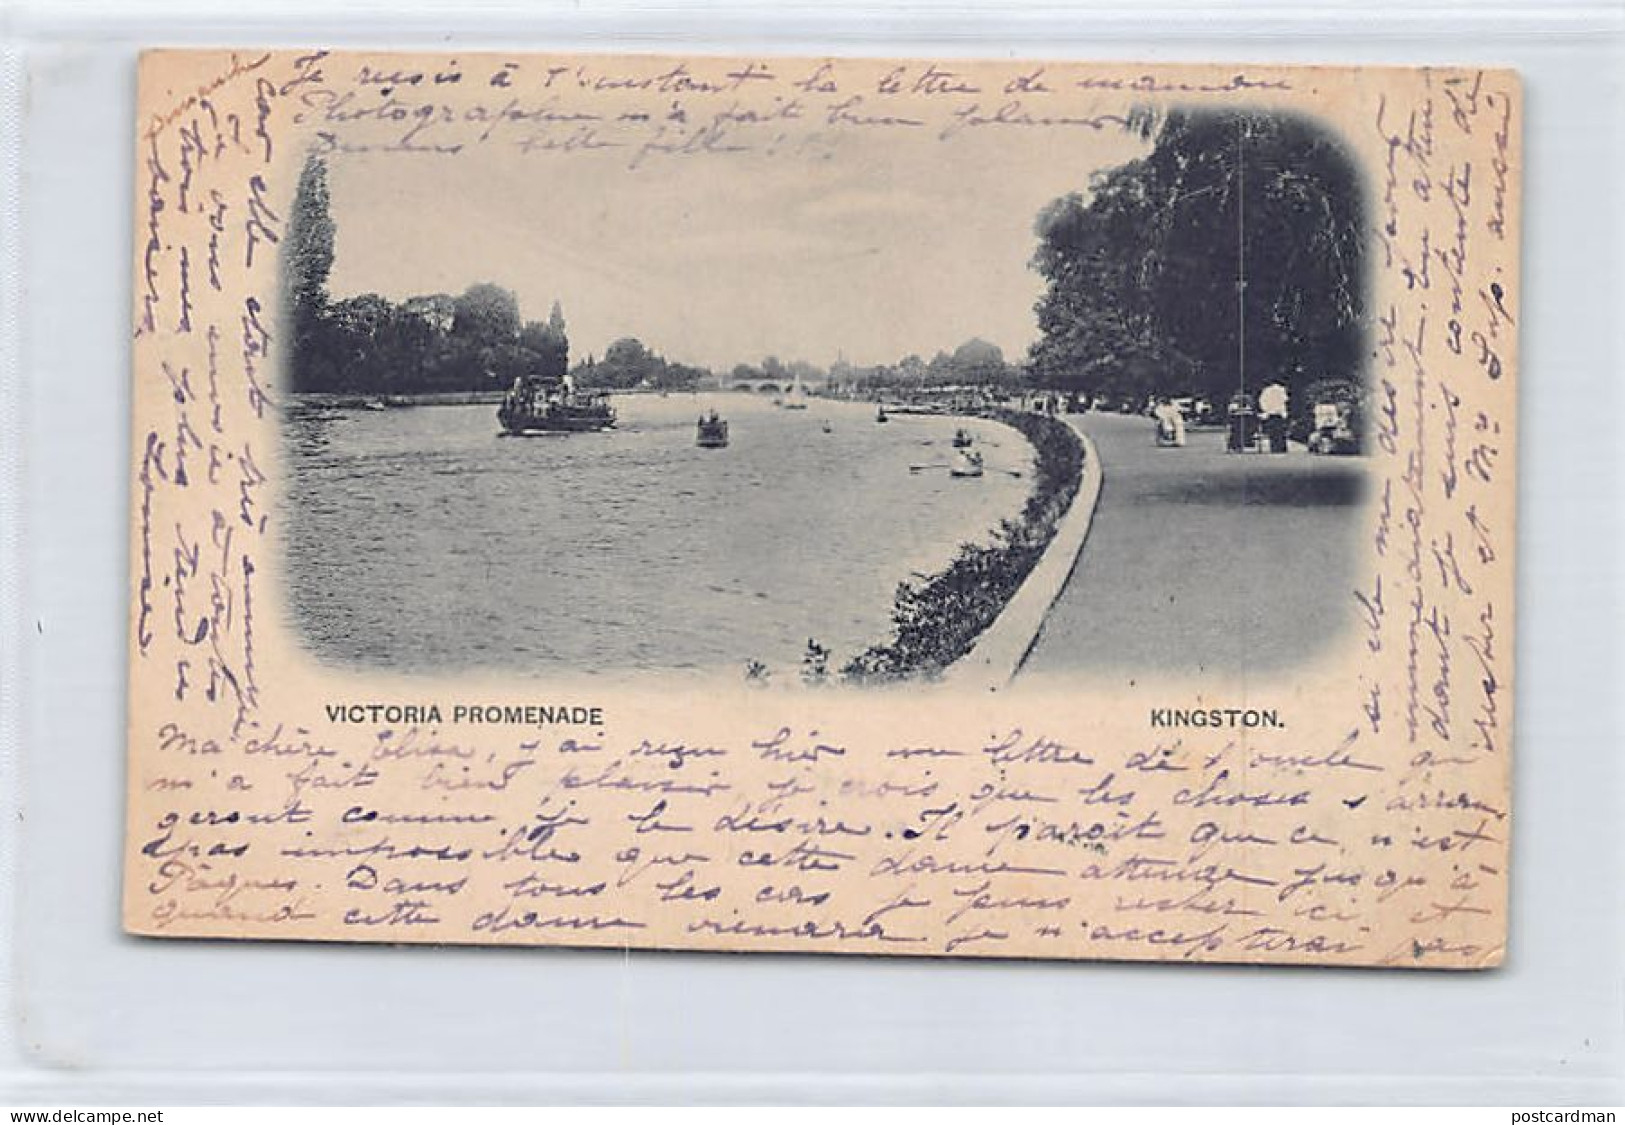 KINGSTON UPON THAMES (Greater London) Victoria Promenade - Year 1899 - Forerunner Small Size Postcard - SEE SCANS FOR CO - Londen - Buitenwijken